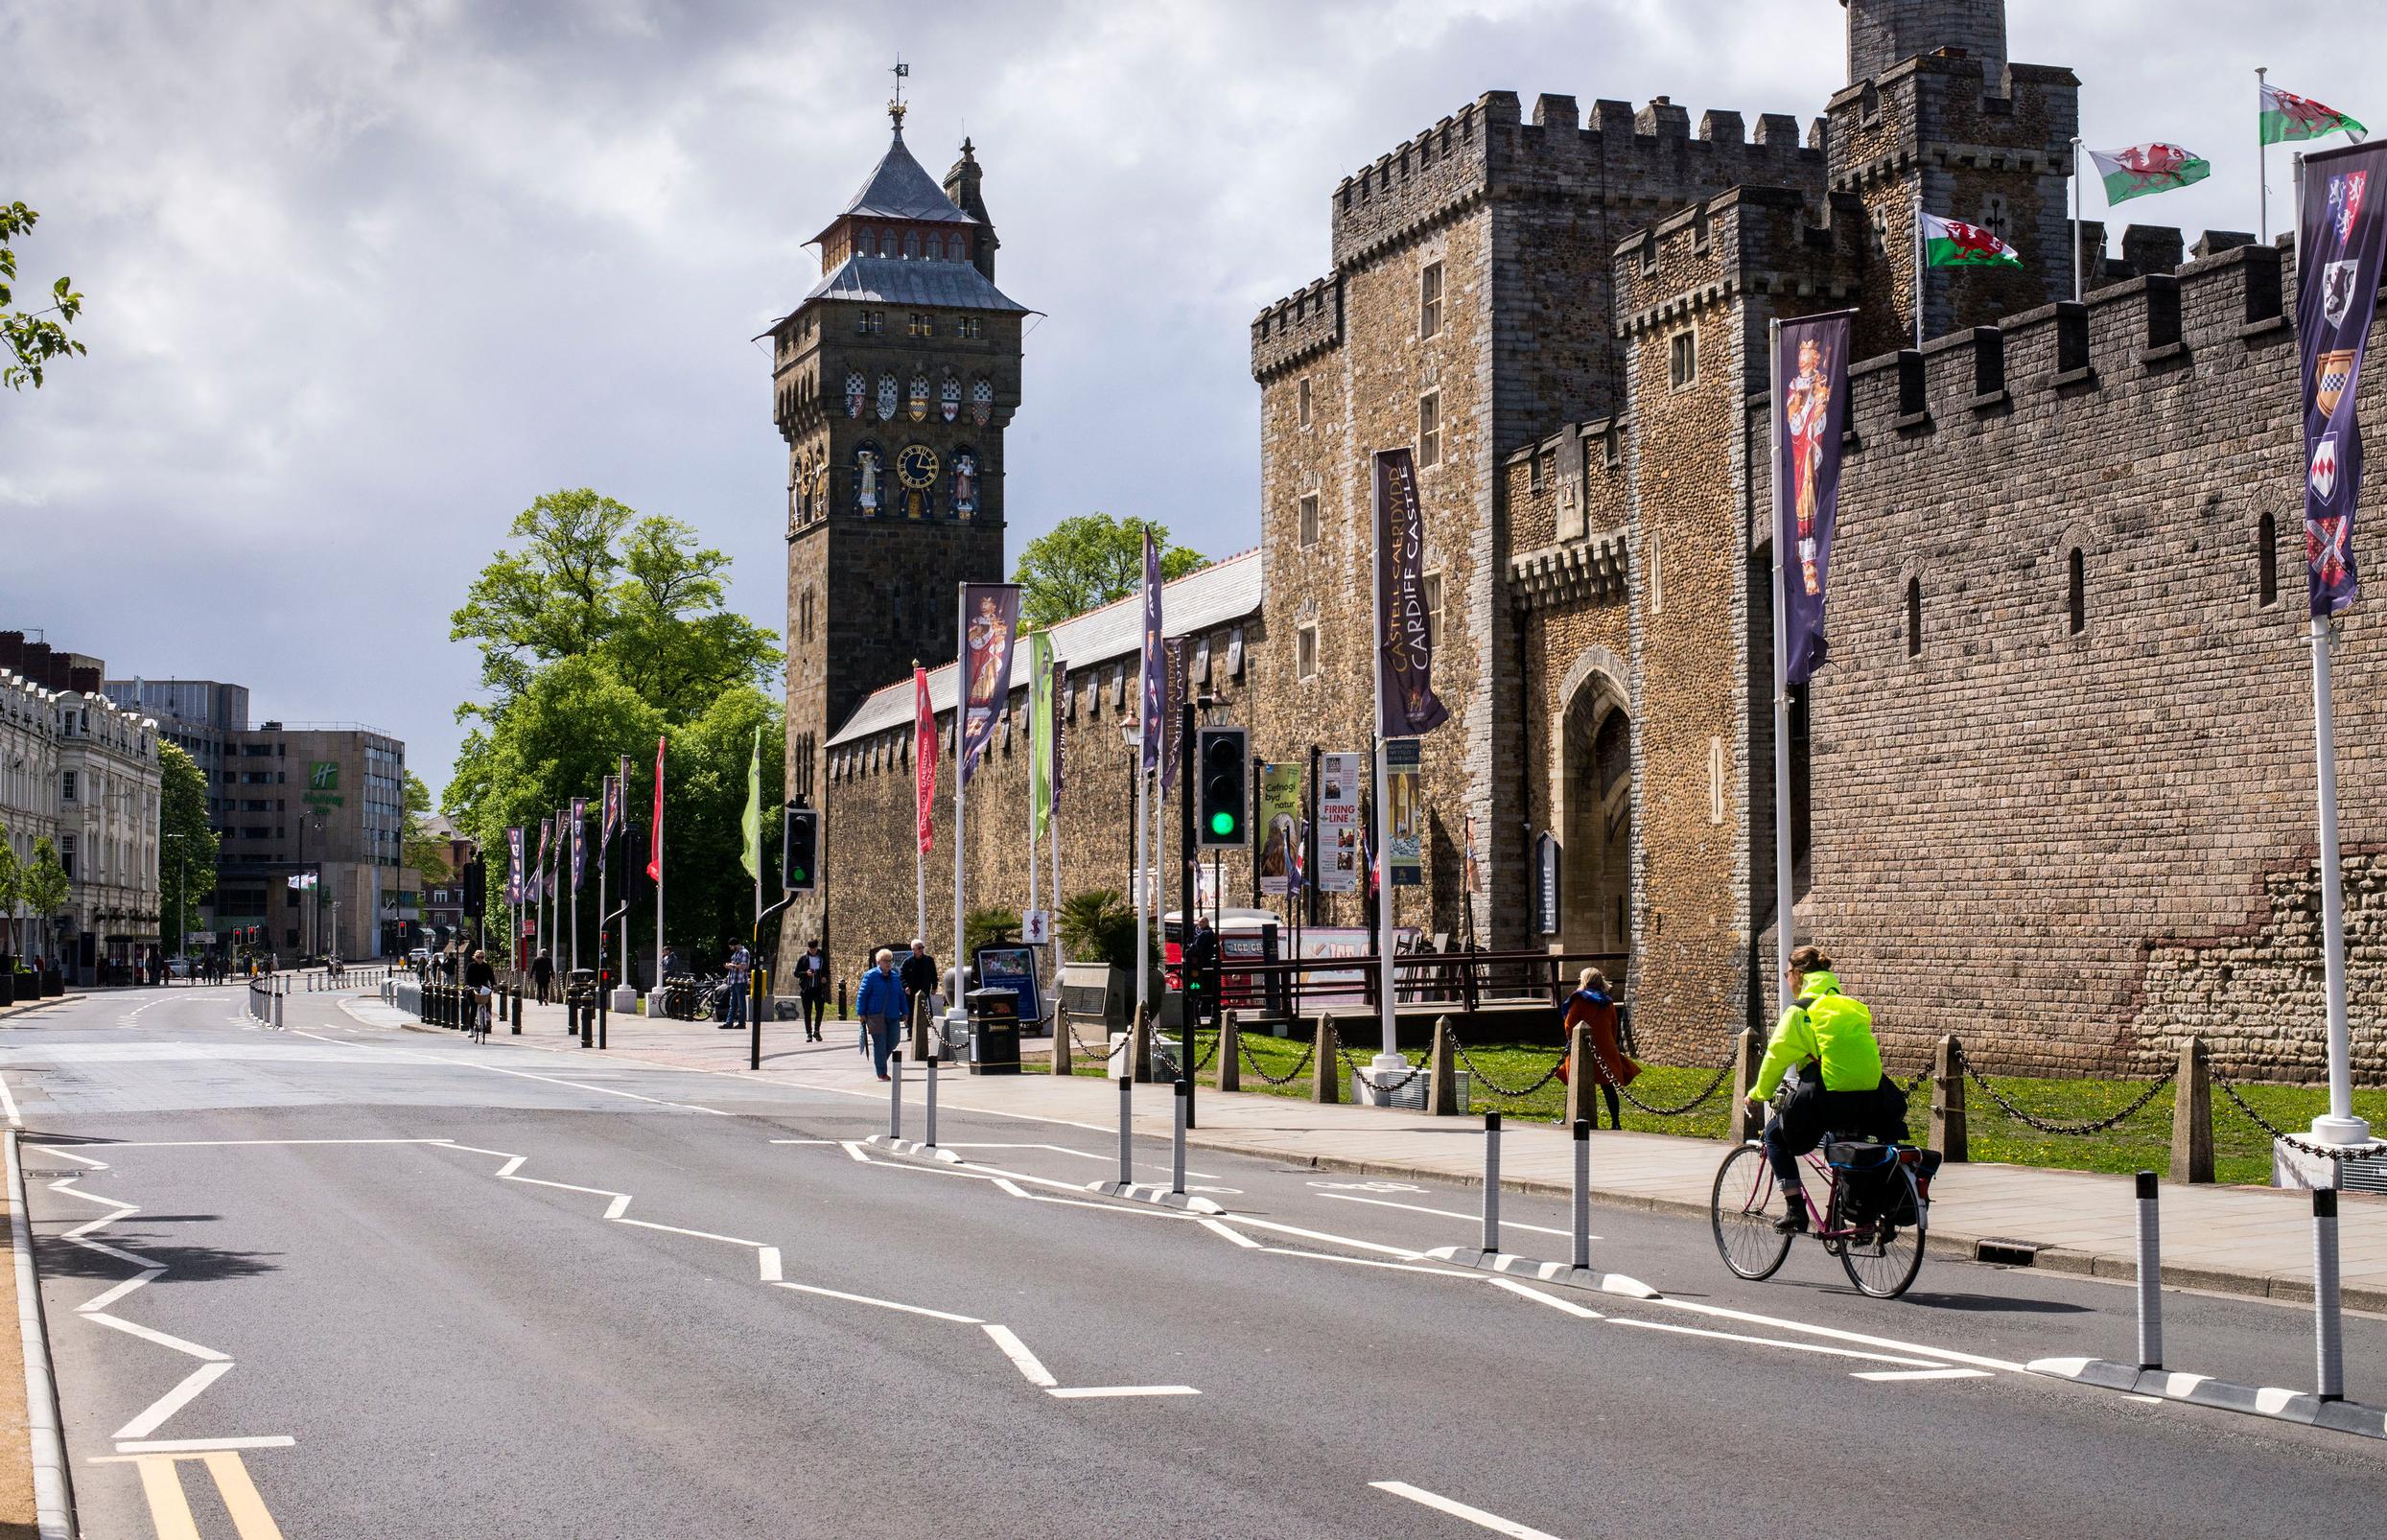 General traffic will be re-admitted to Castle Street, Cardiff, but with bus lanes and the cycleway beyond the wands will remain